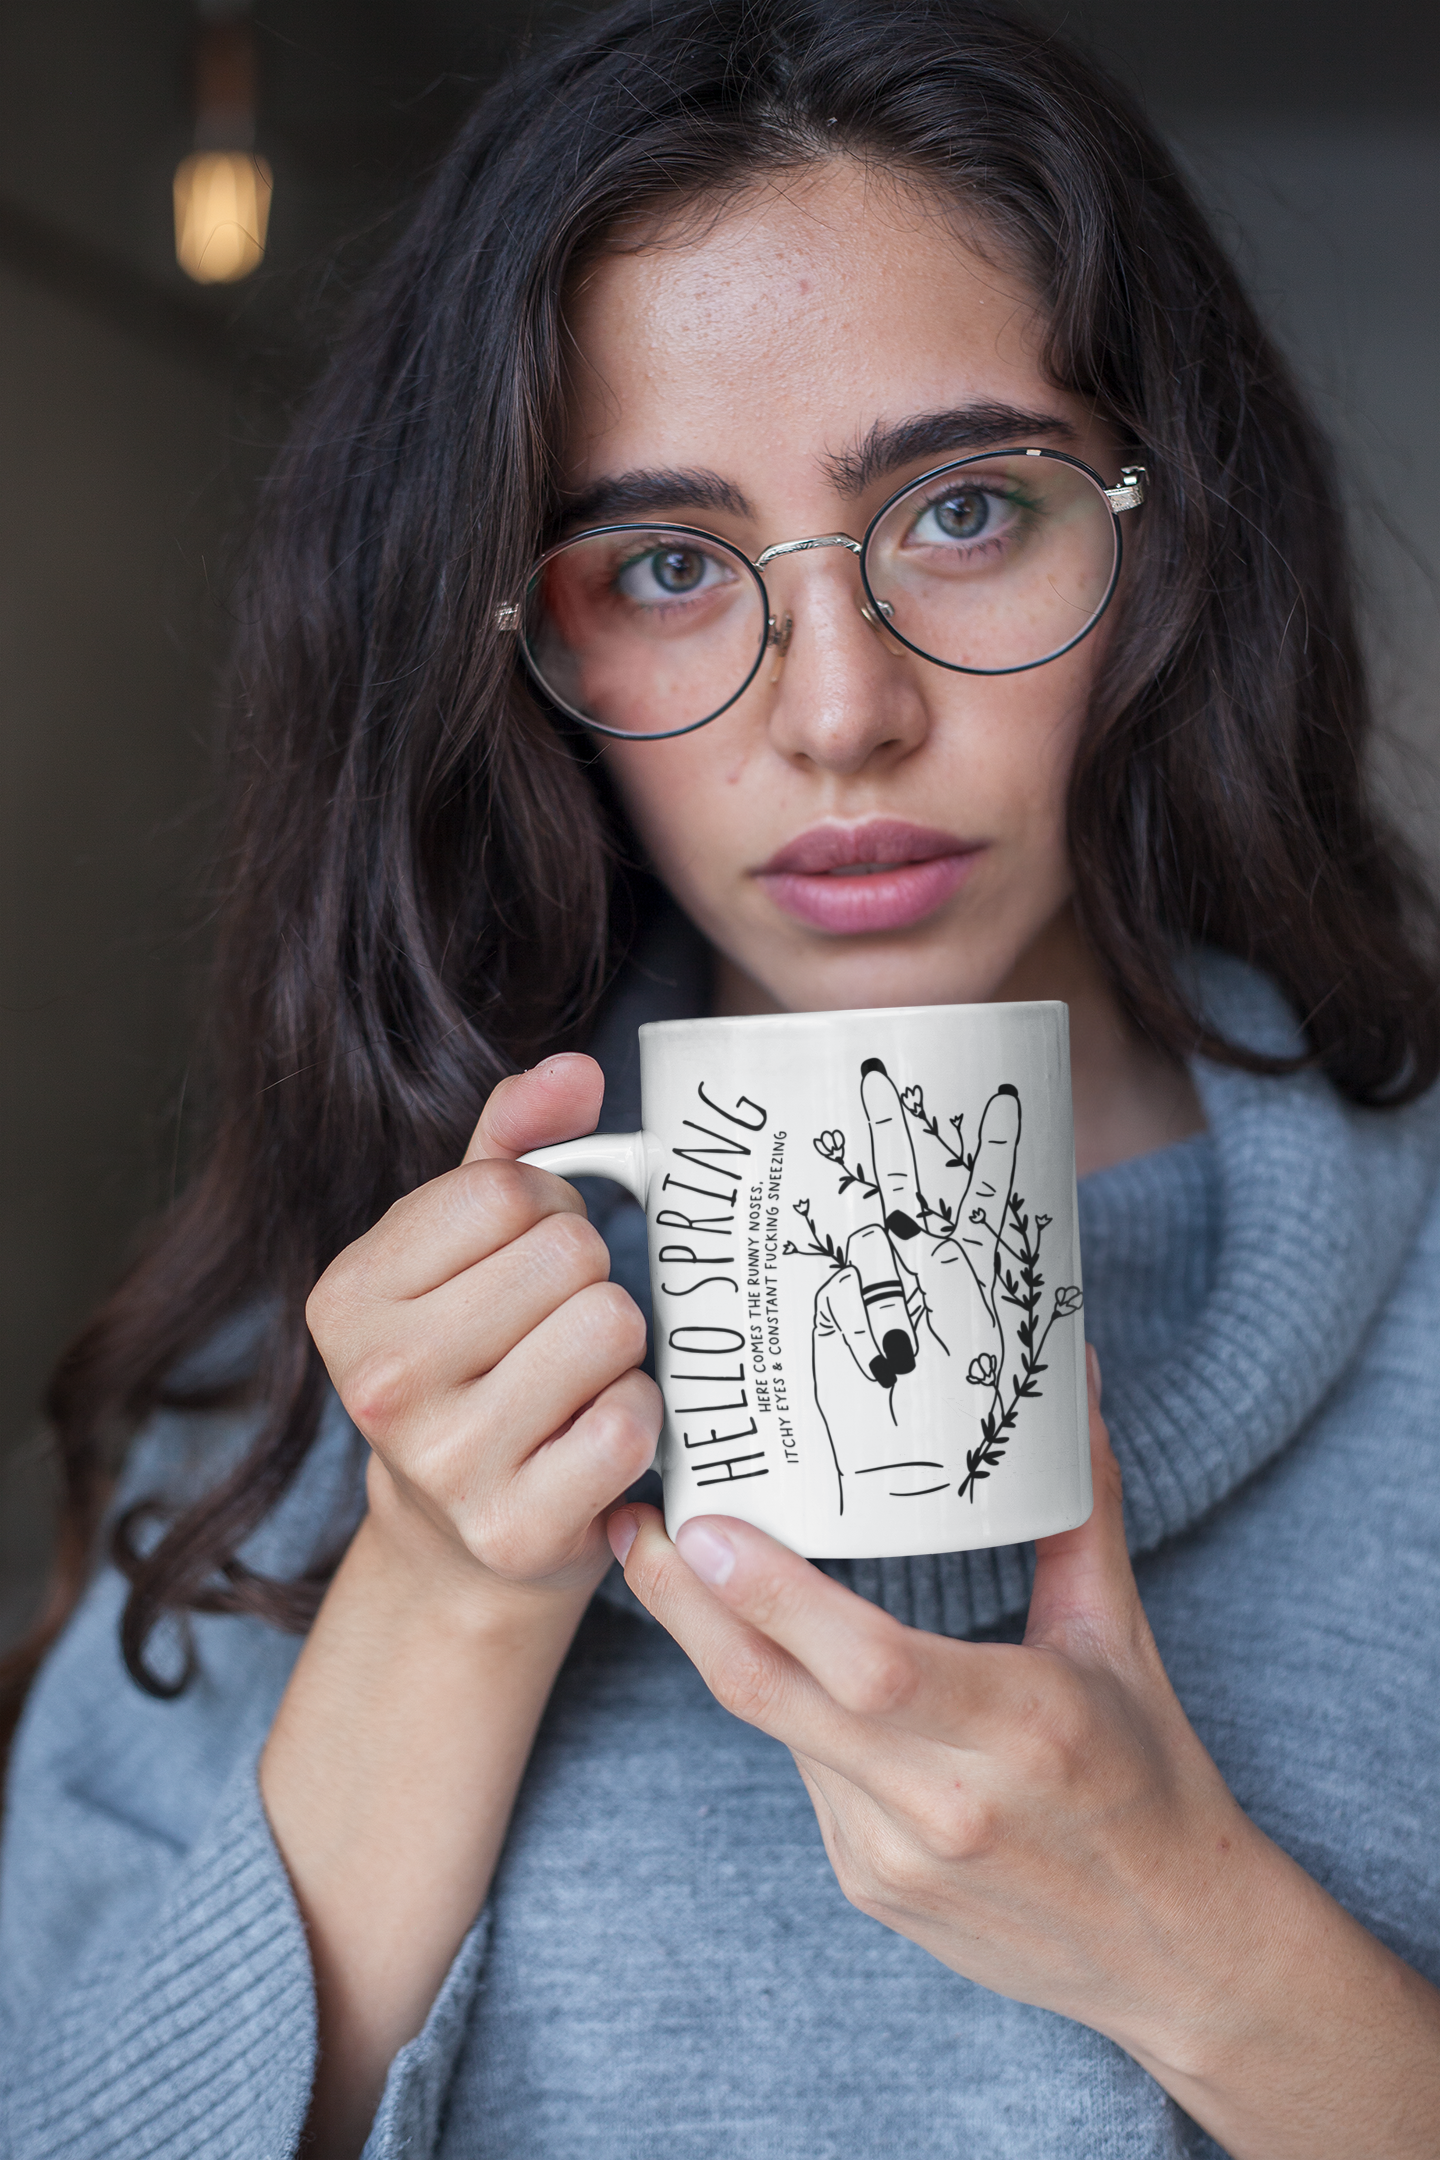 White ceramic mug with a cute boho style drawing of a hand sticking two fingers up, covered in twining flowers. There is a quote to the left which reads ' hello spring - here comes the runny noses, itchy eyes & constant fucking sneezing' printed in black.